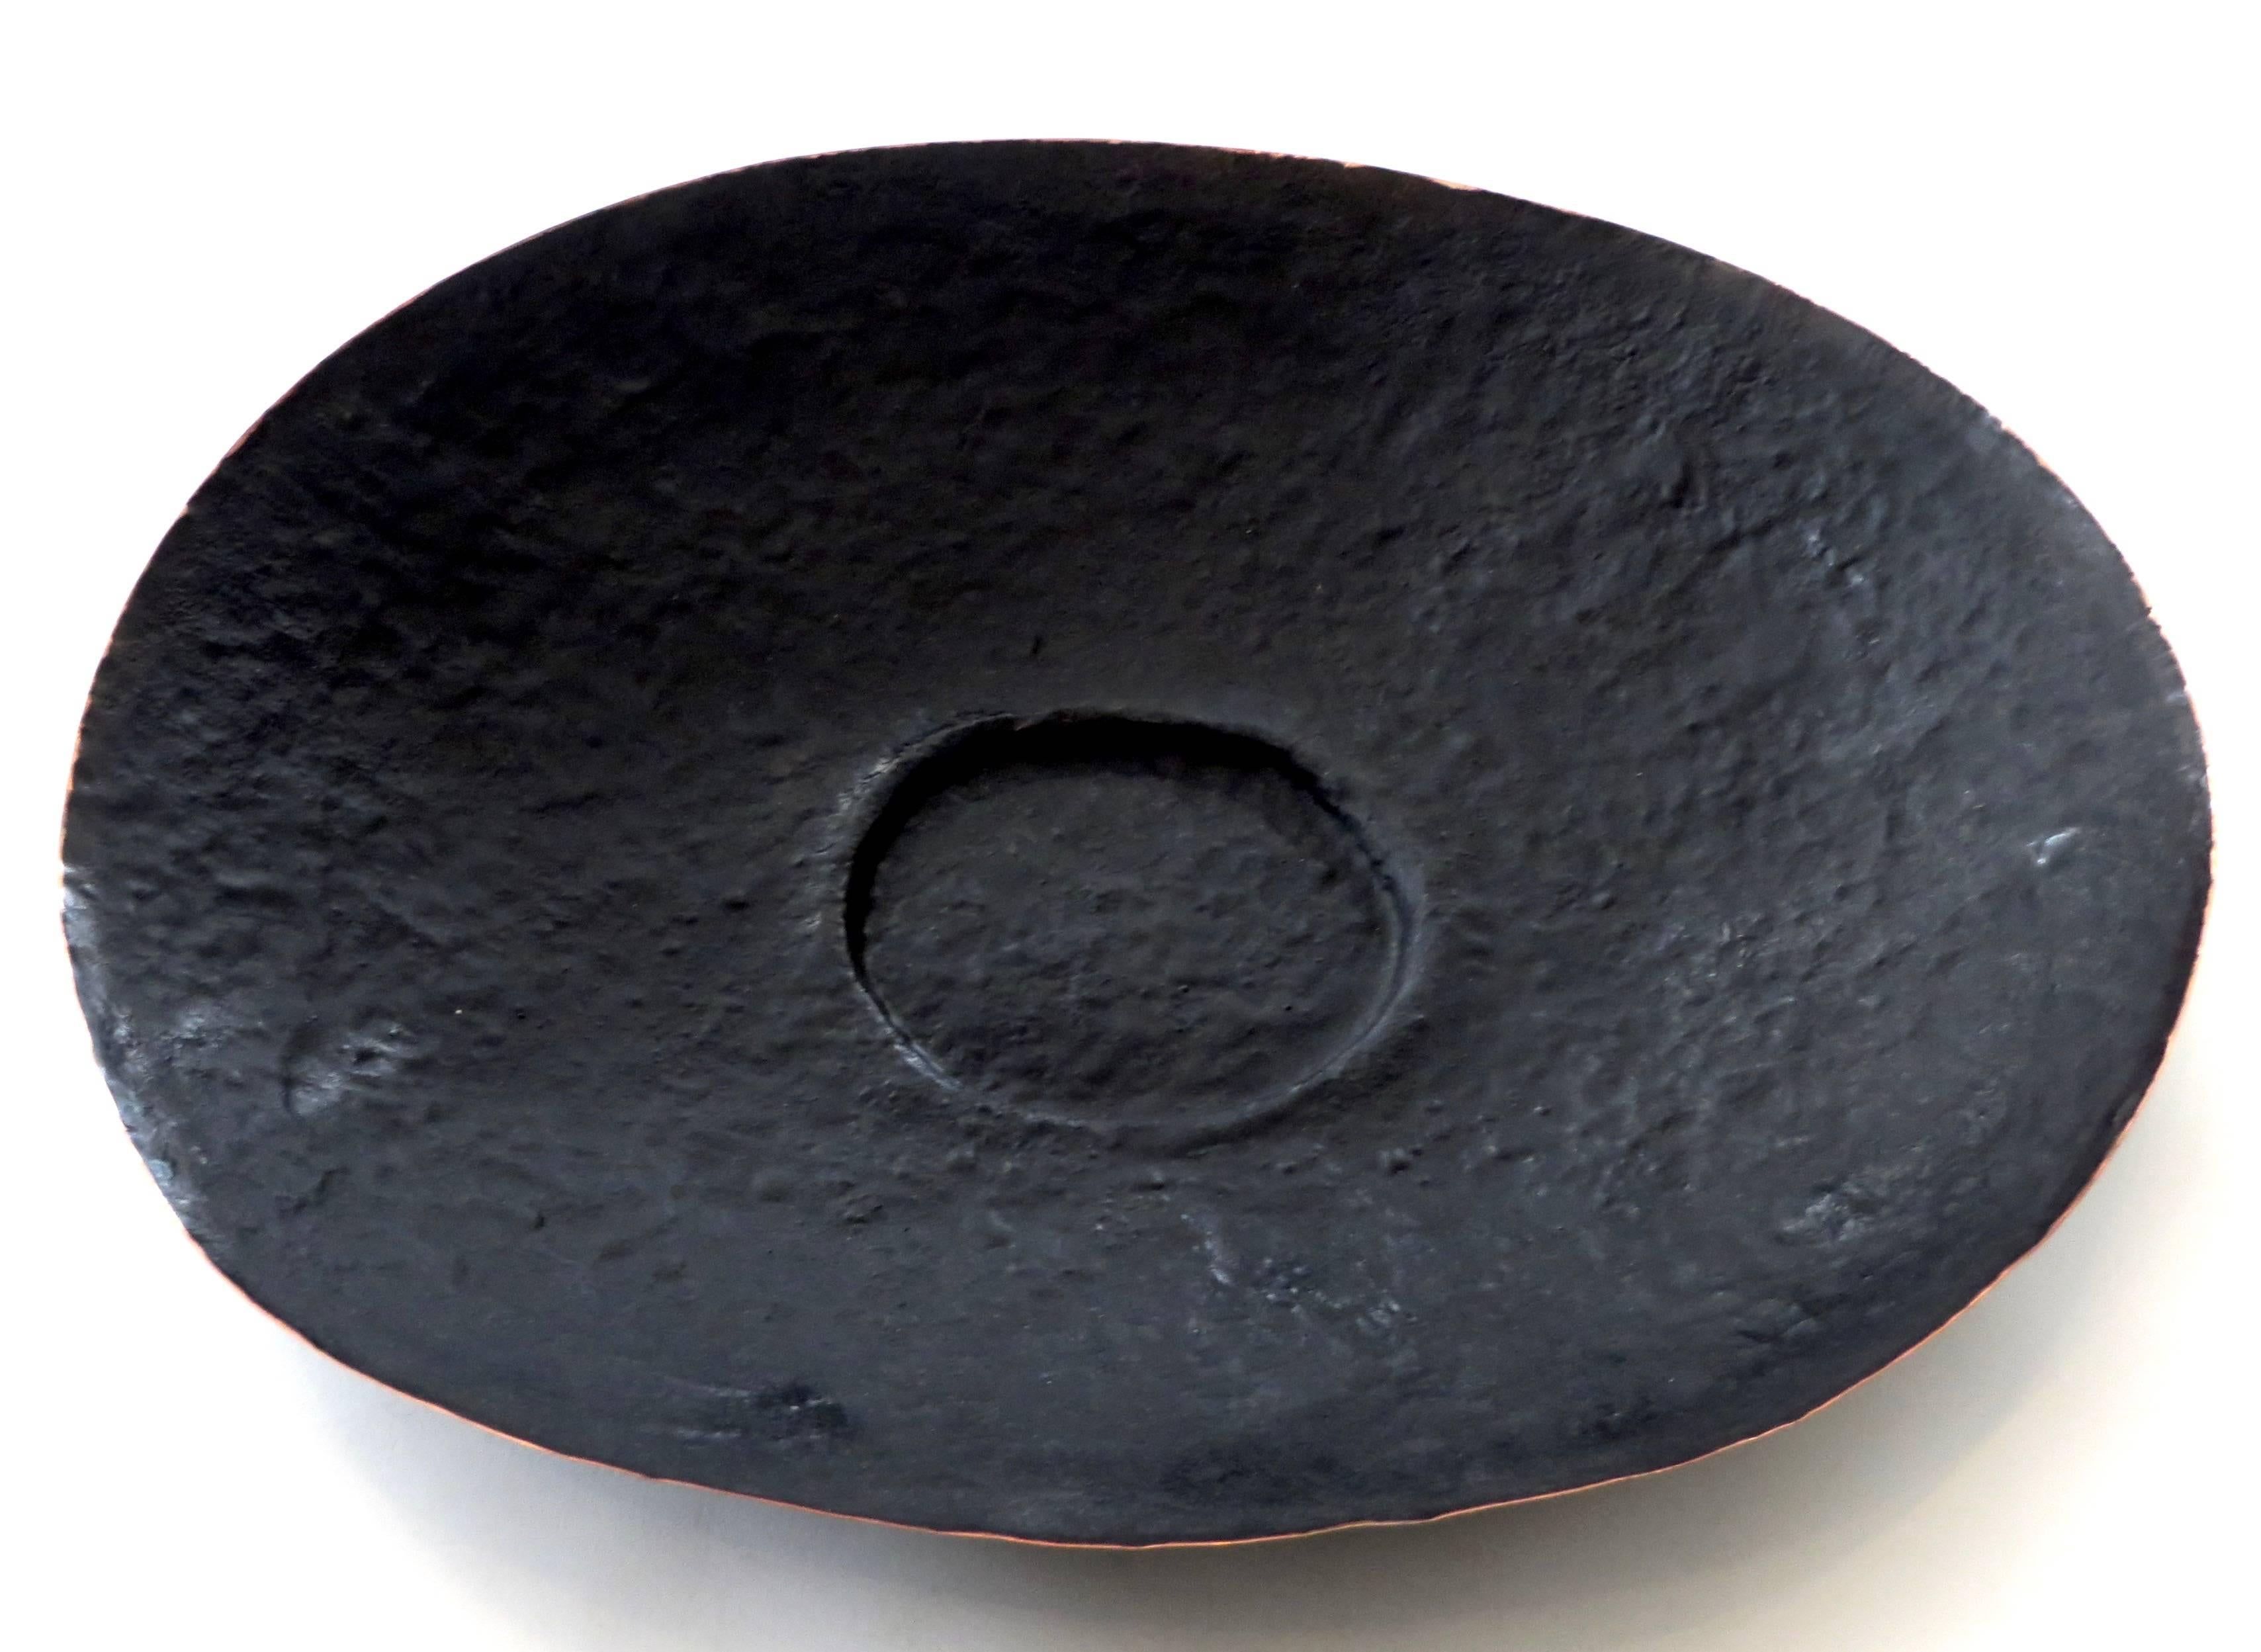 Powder-Coated Hand-Hammered Footed Sculptural Copper Bowl by Hvnter Gvtherer Poros Series